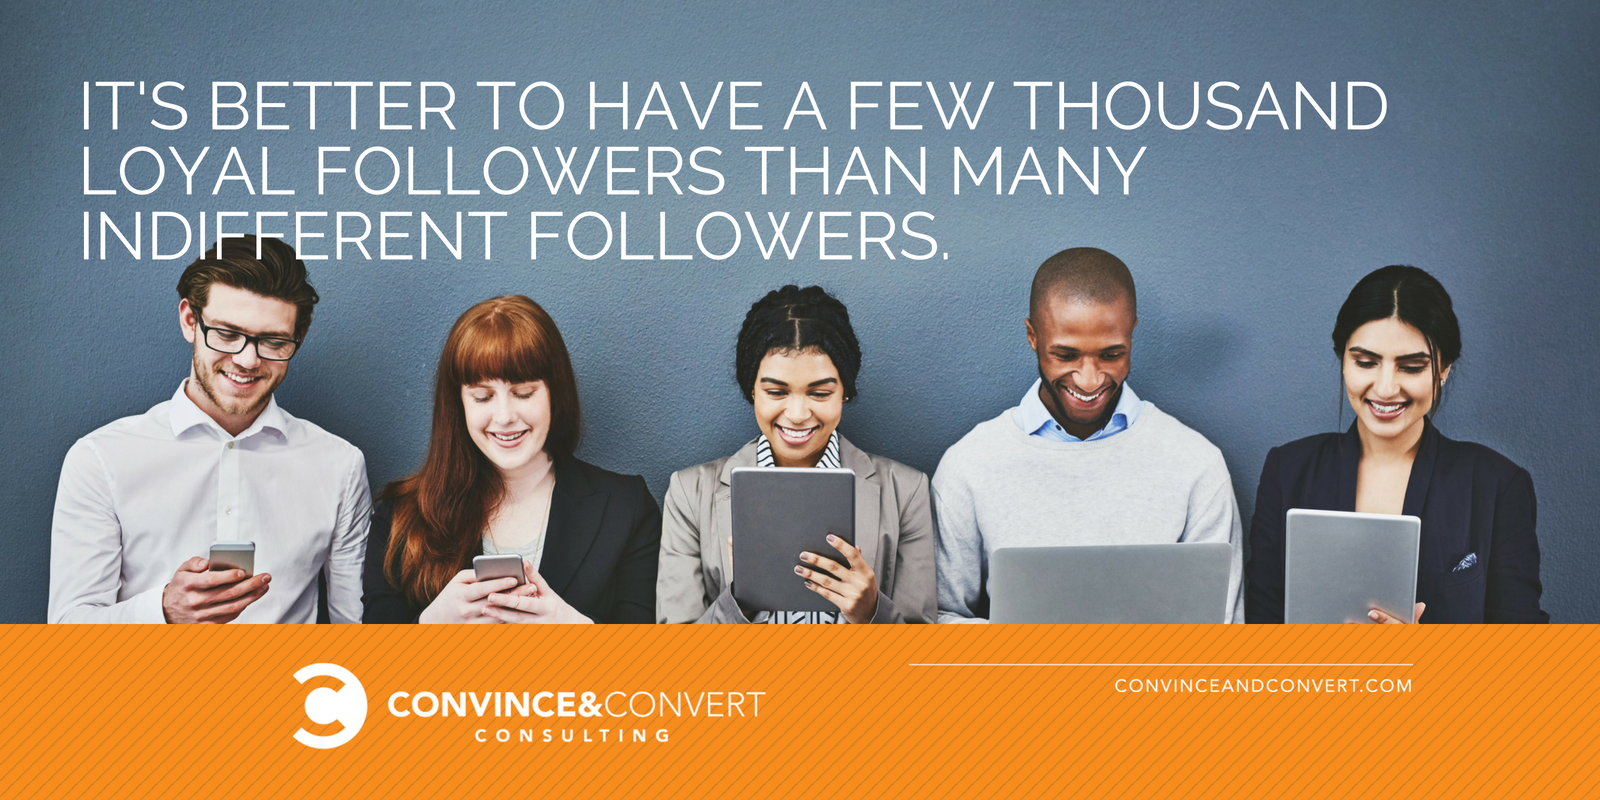 It's better to have a few thousand loyal followers than many indifferent followers.